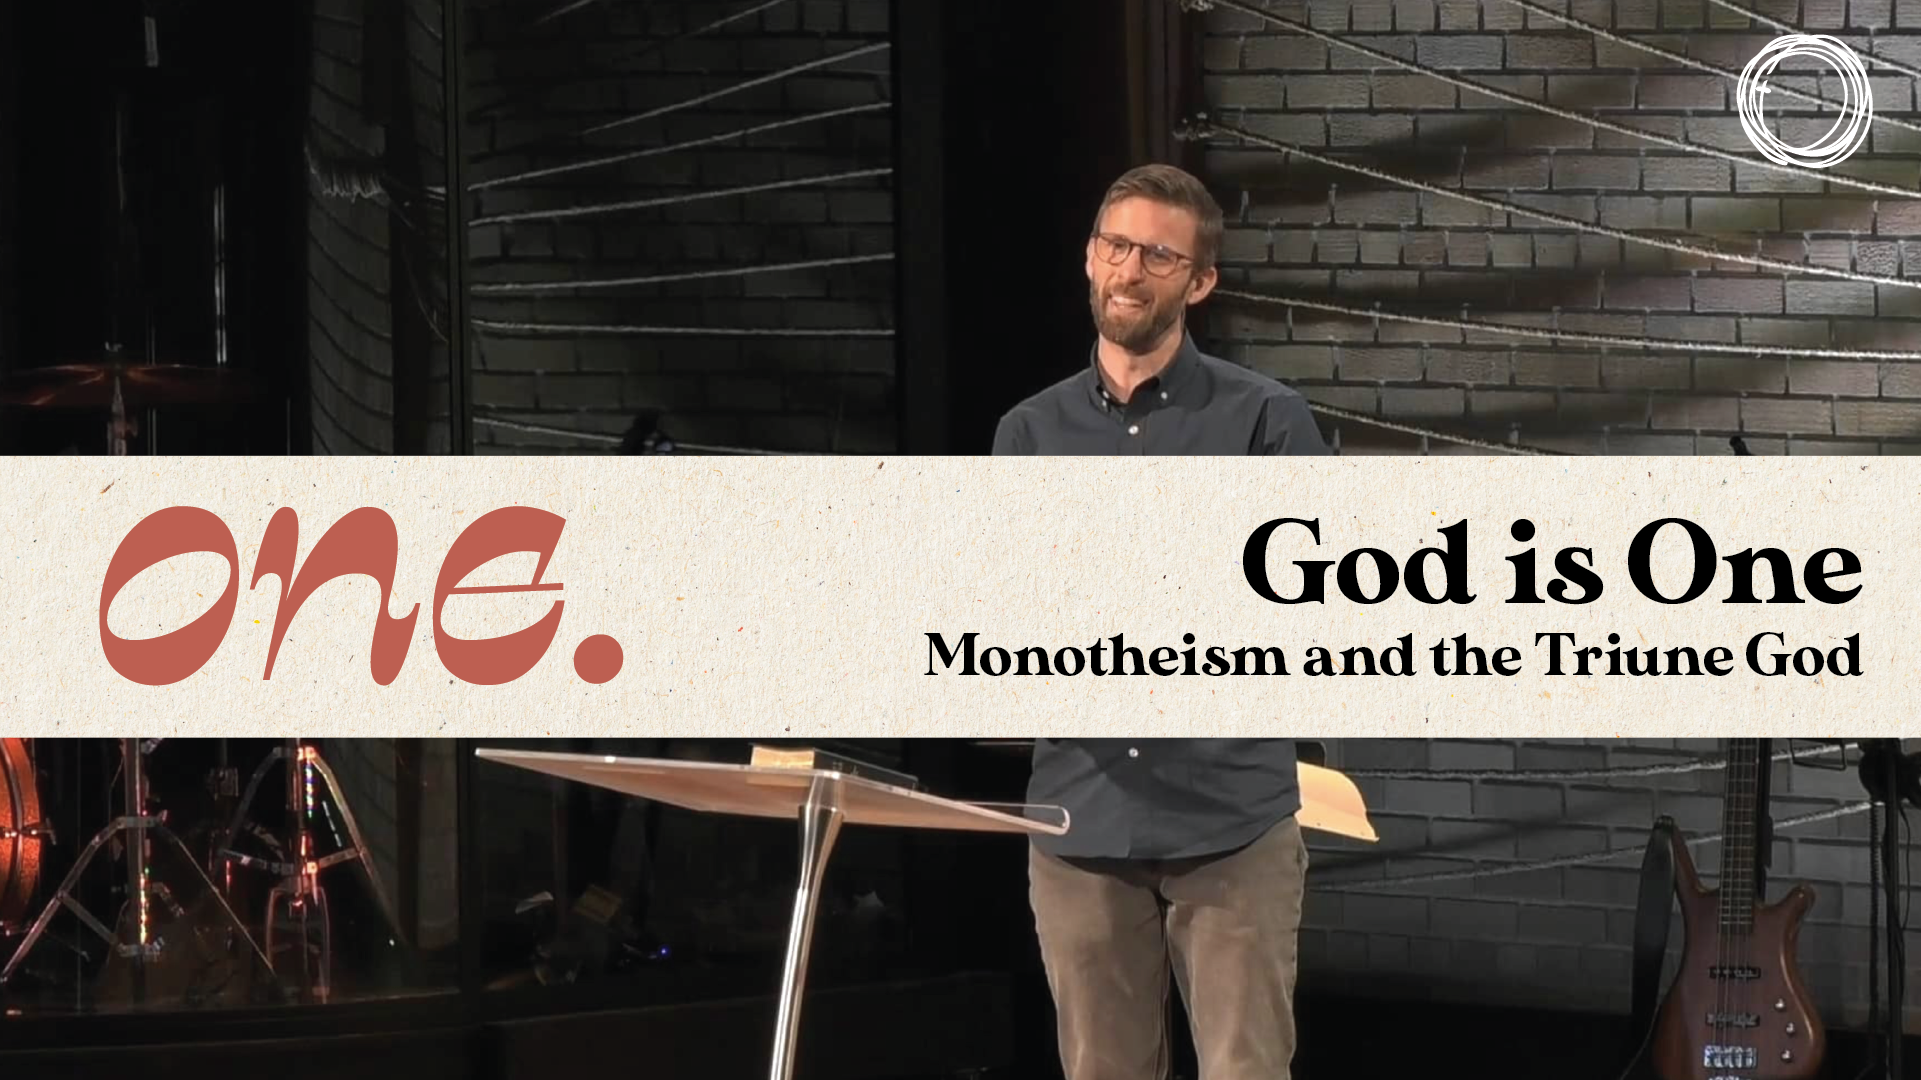 God is One: Monotheism and the Triune God